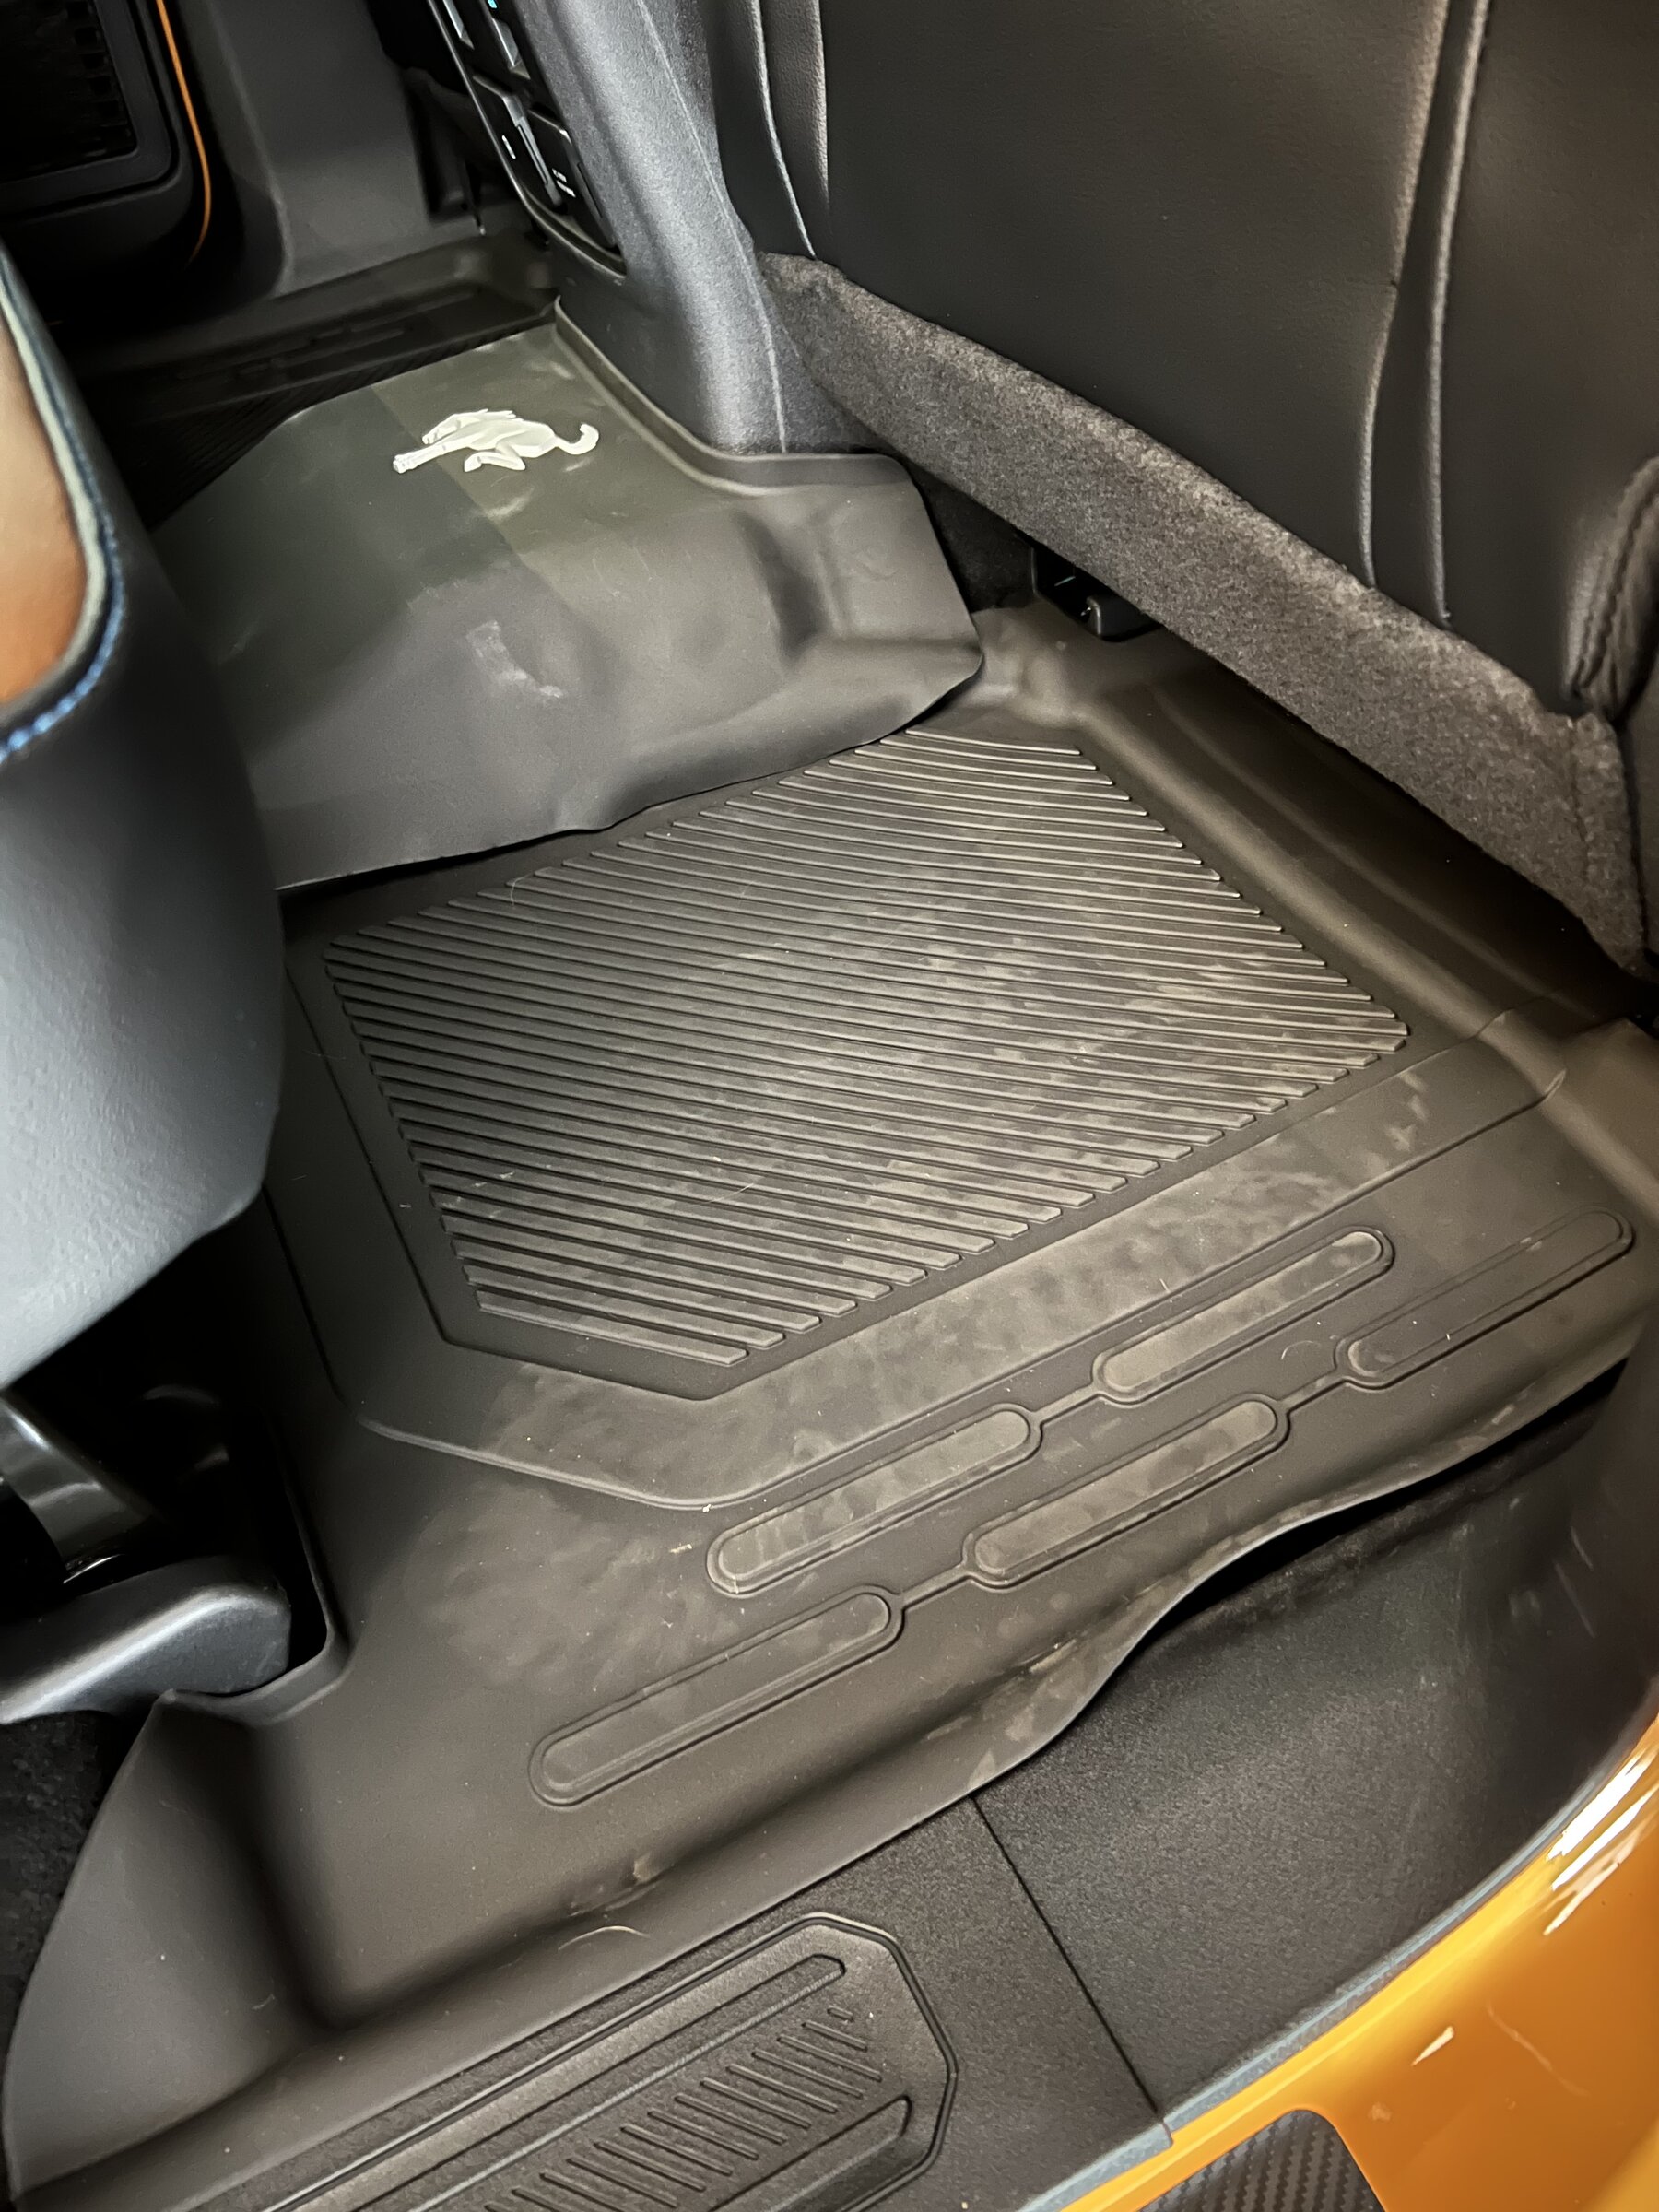 Bronco Bronco Weathertech Floor Liners and Cargo Liners now available 661EC62A-C8D1-4627-891D-6A0A911319D4